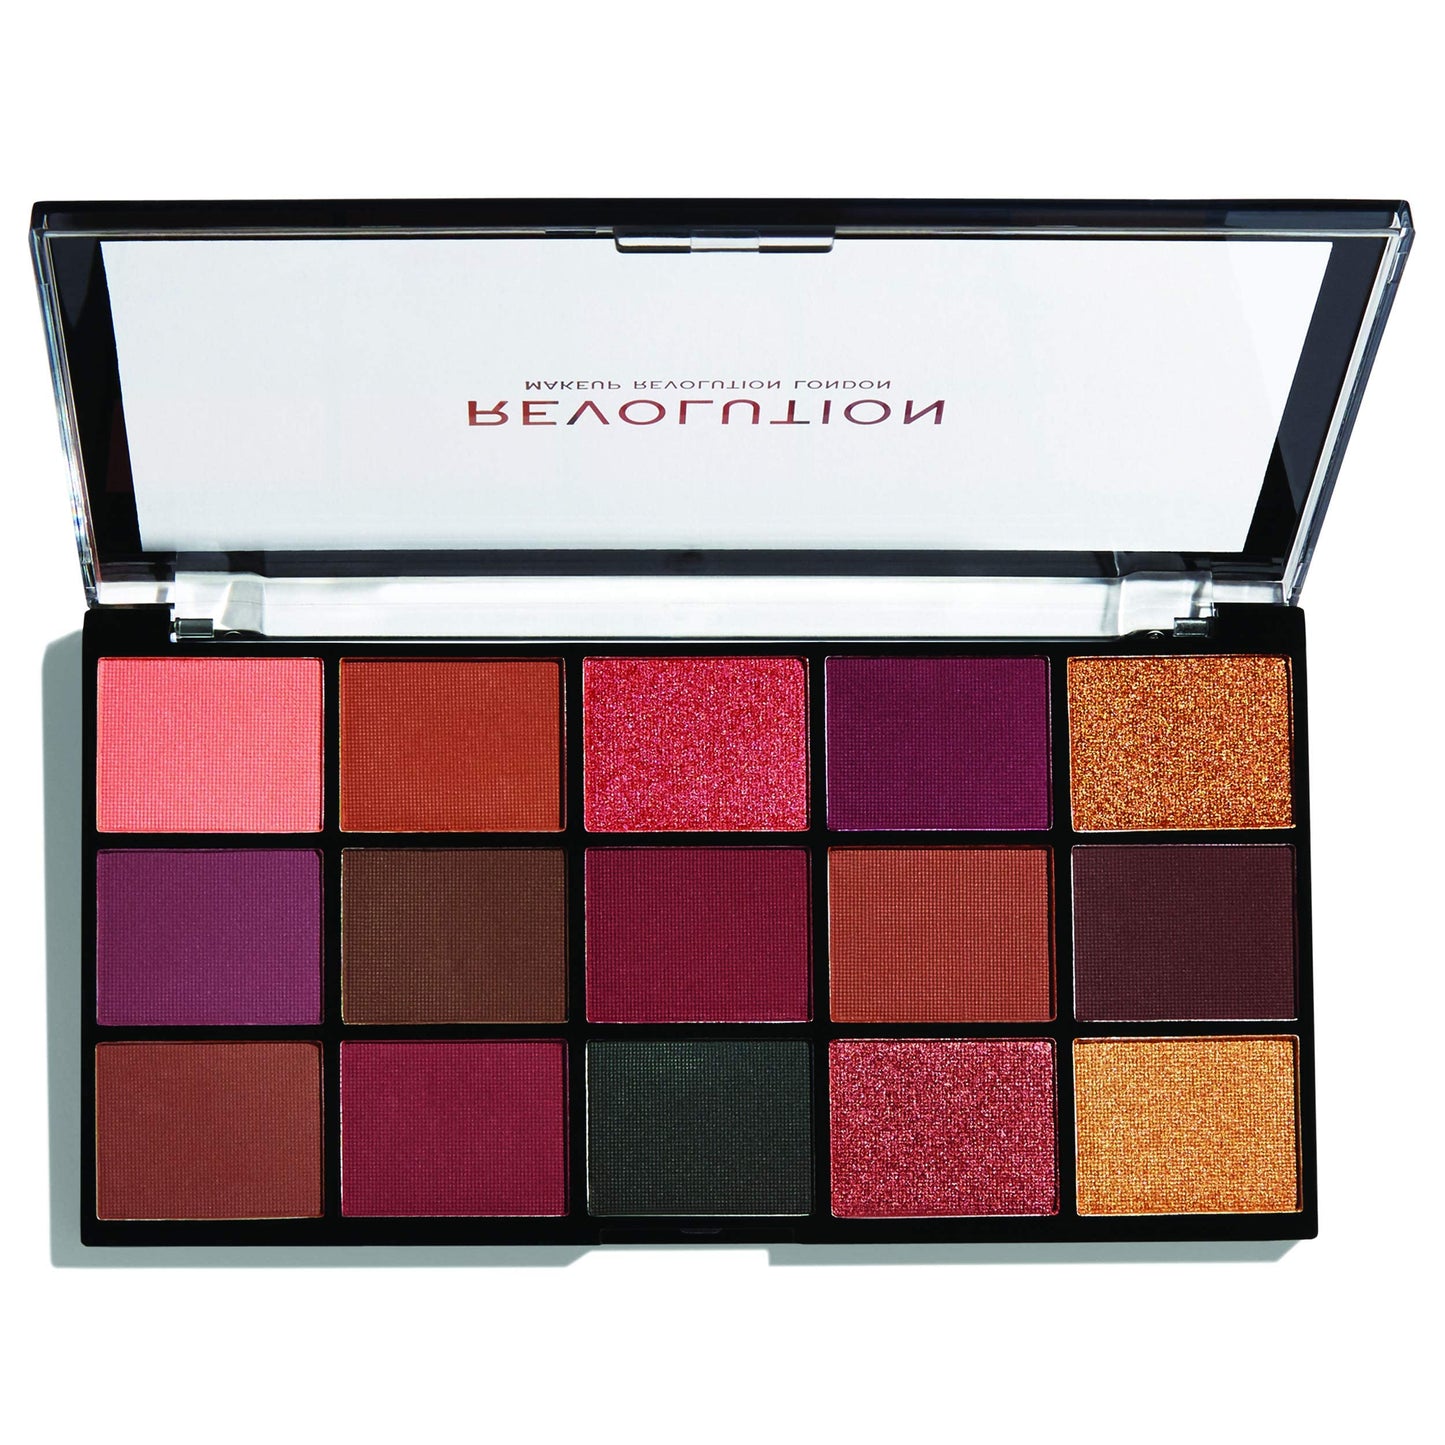 Makeup Revolution Re-Loaded Eyeshadow Palette Newtrals 3, Makeup Eyeshadow Palette, Includes 15 Shades, Lasts All Day Long, Vegan & Cruelty Free, 16.5g